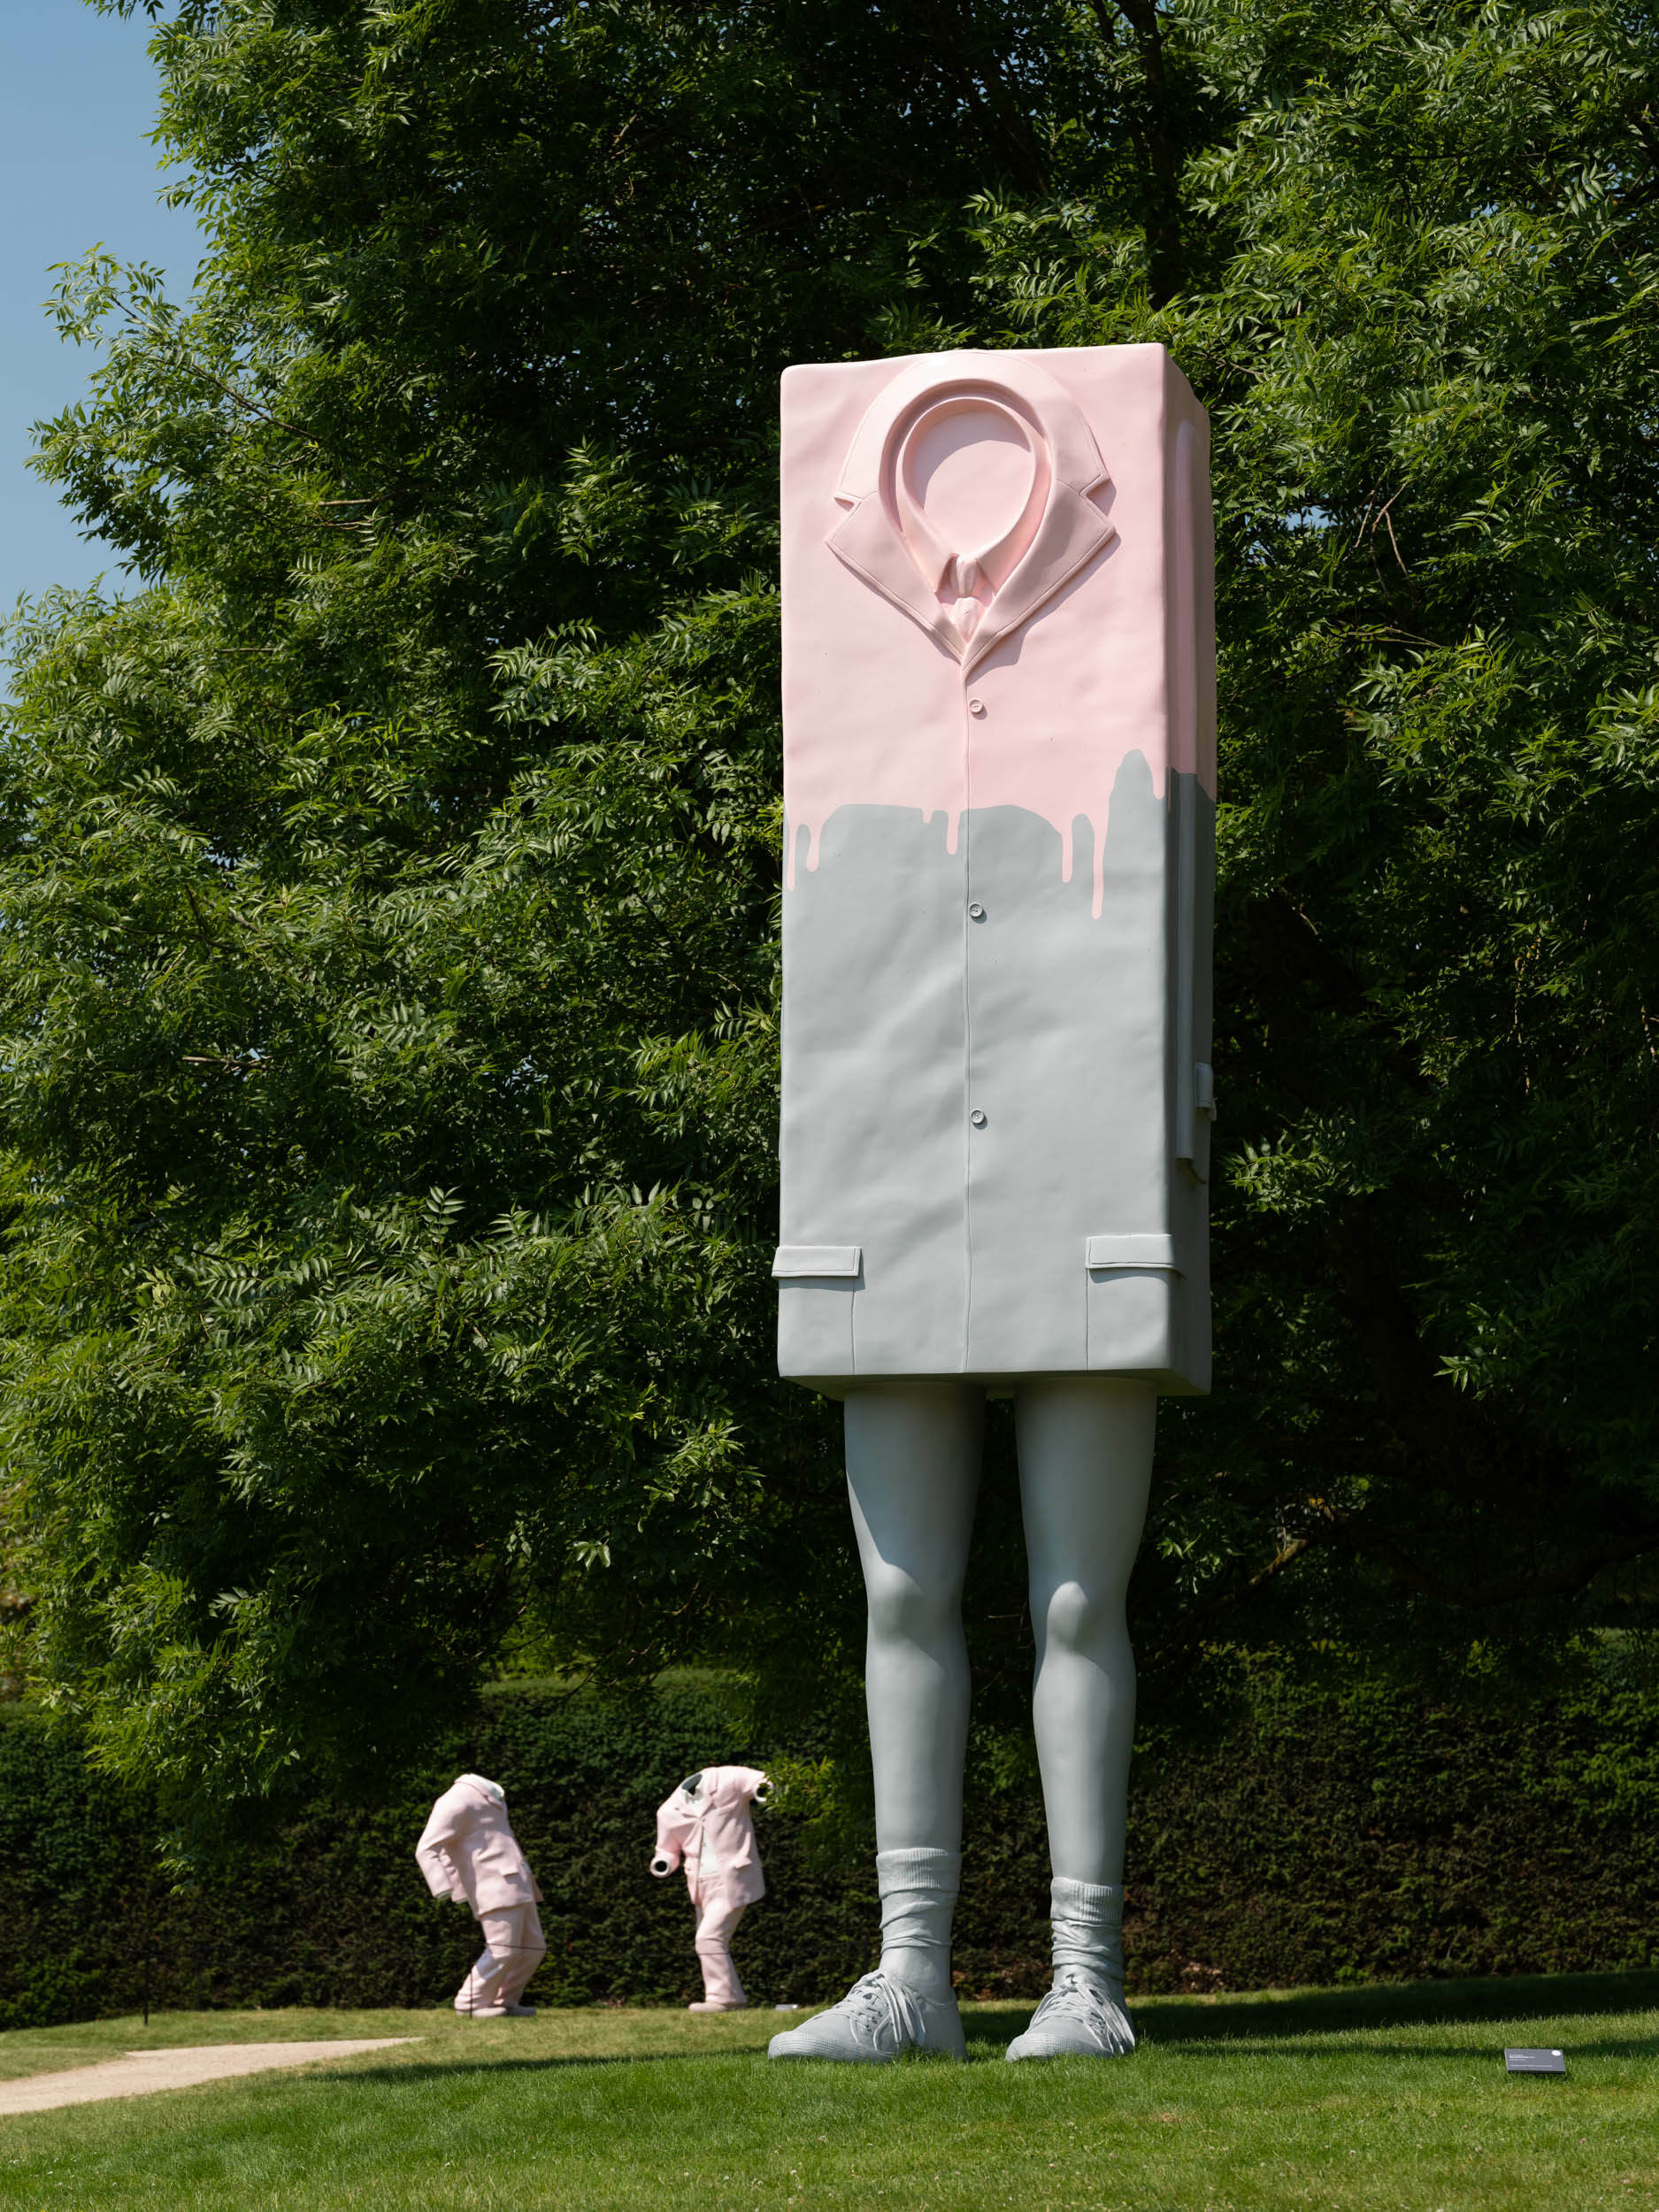 A pink and grey box on legs wearing a suit, two headless sculptures wearing pink suits in the background